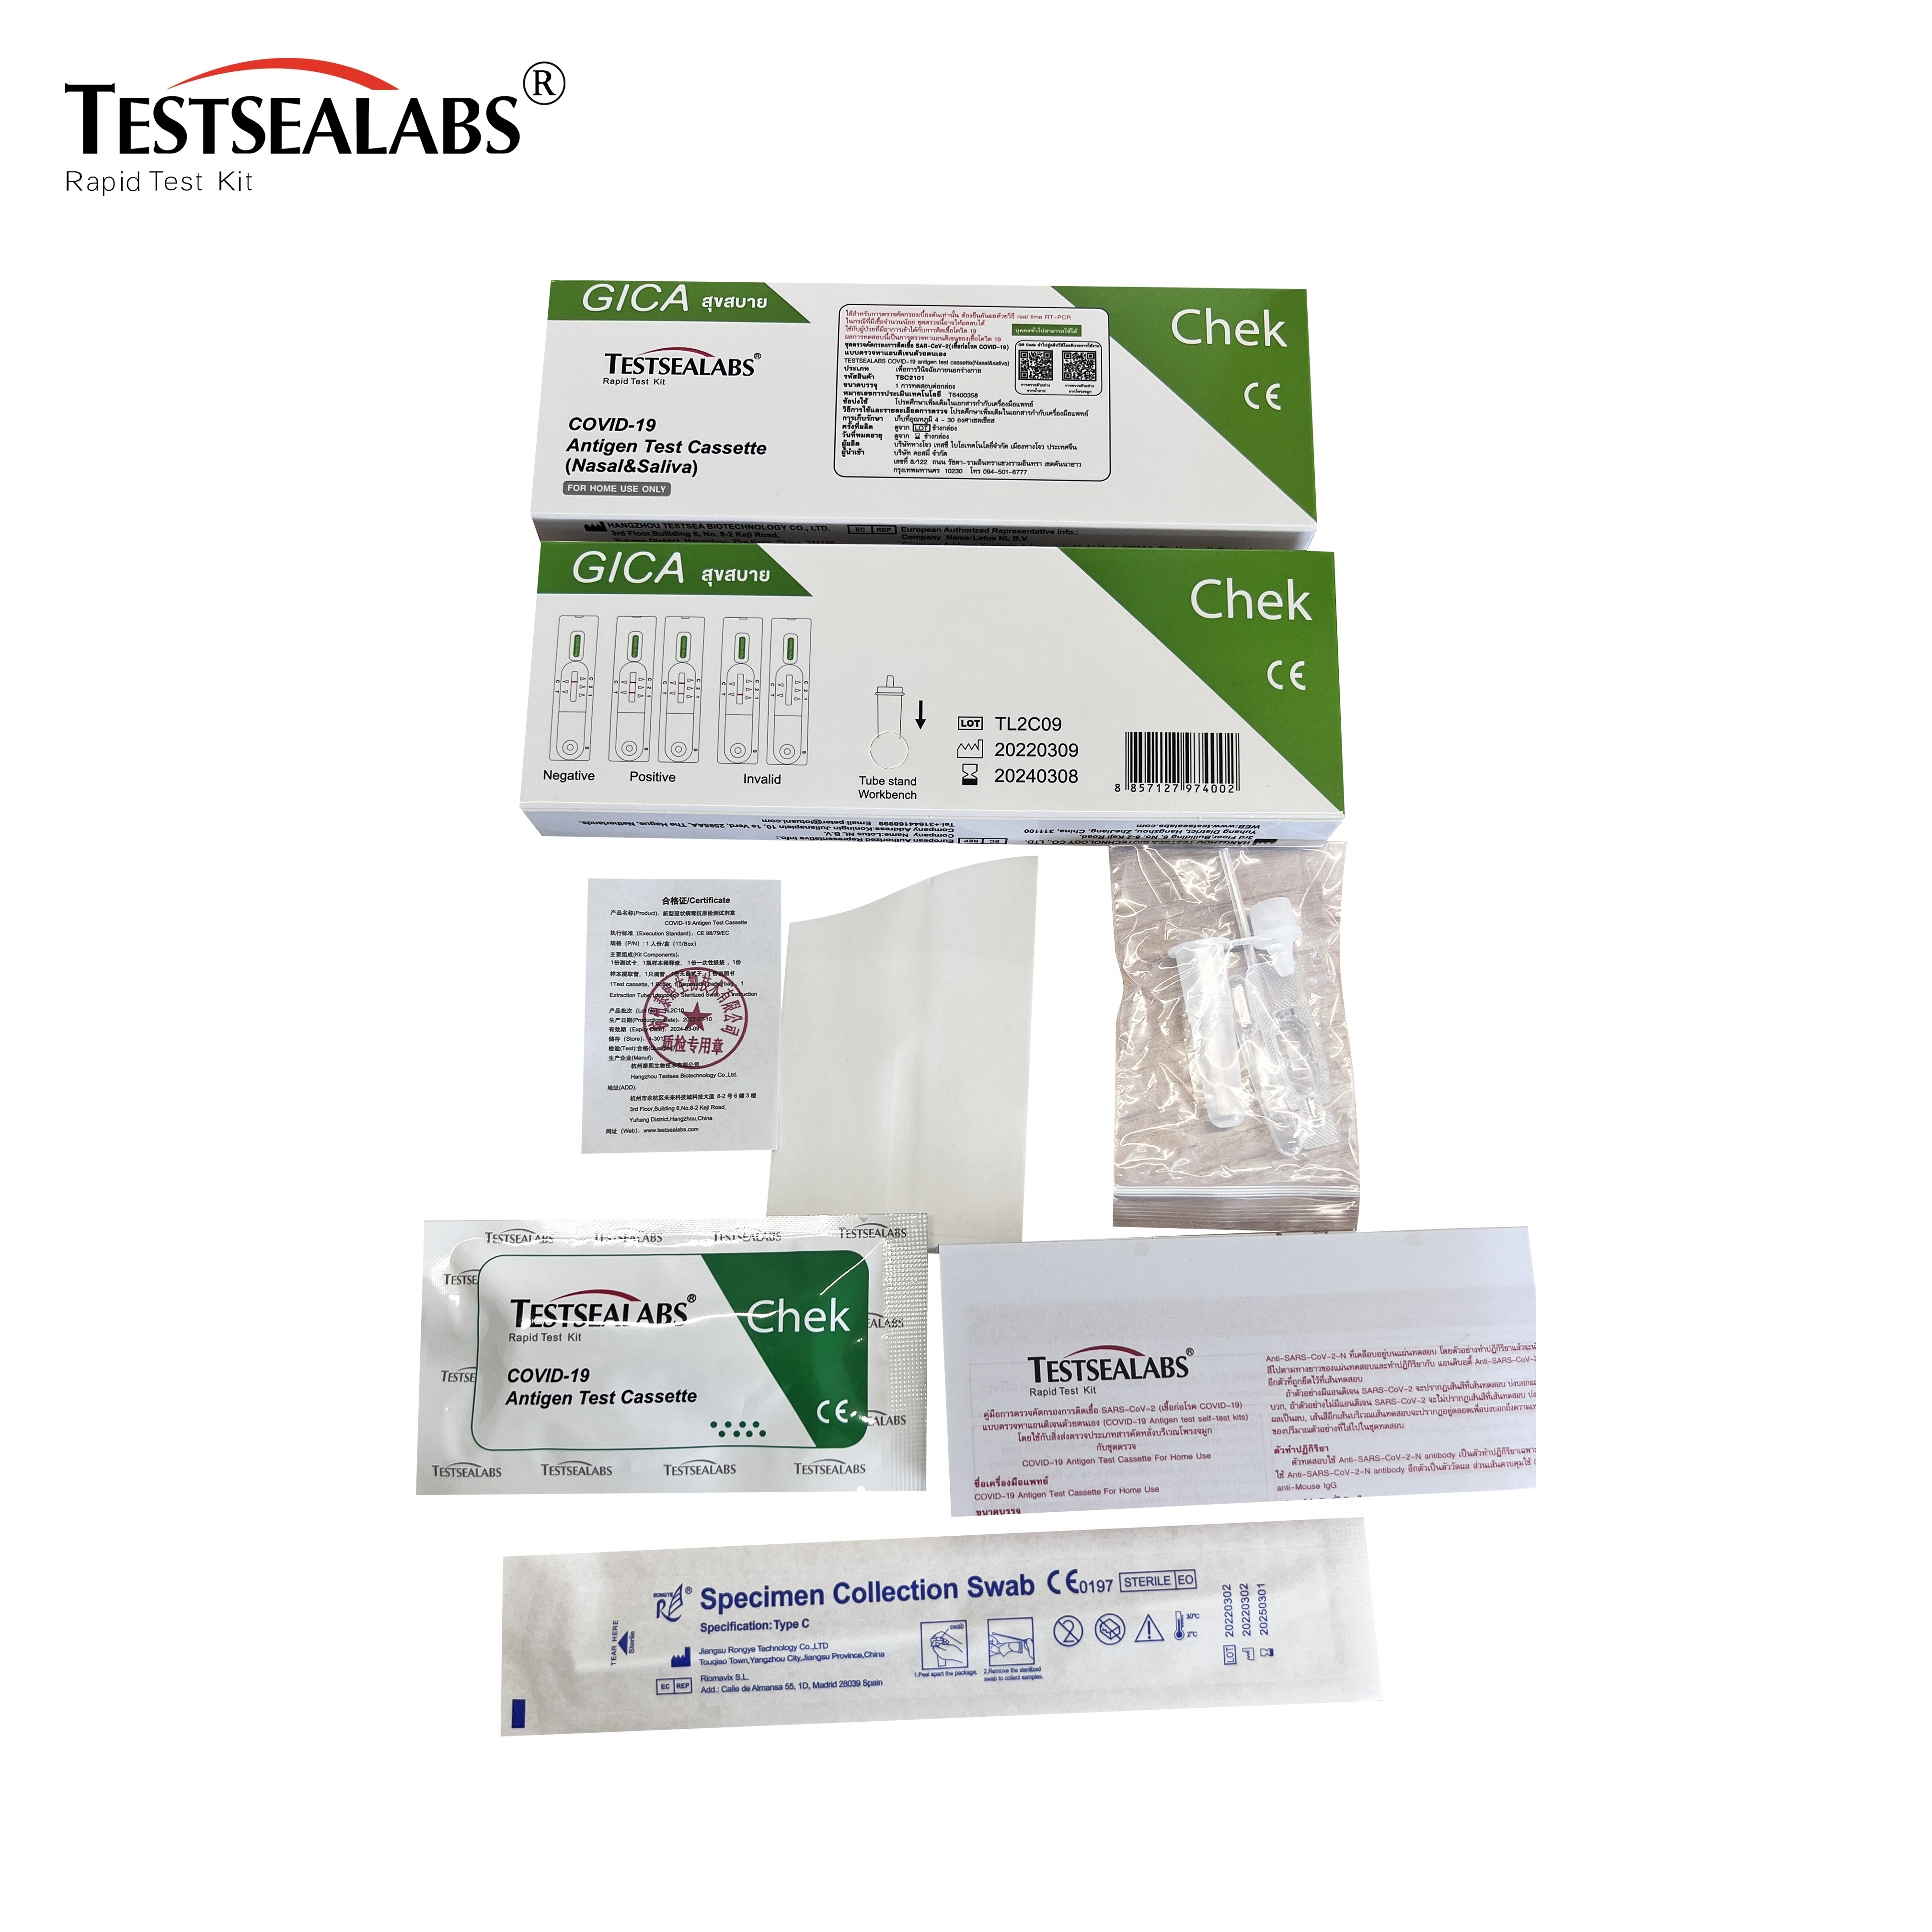 Hot Sale!!! Thailand FDA Approval Most Popular GIGA Testsealabs Covid-19 Antigen Test Nasal $Saliva 2 in 1 Home Self-Test Kit Featured Image